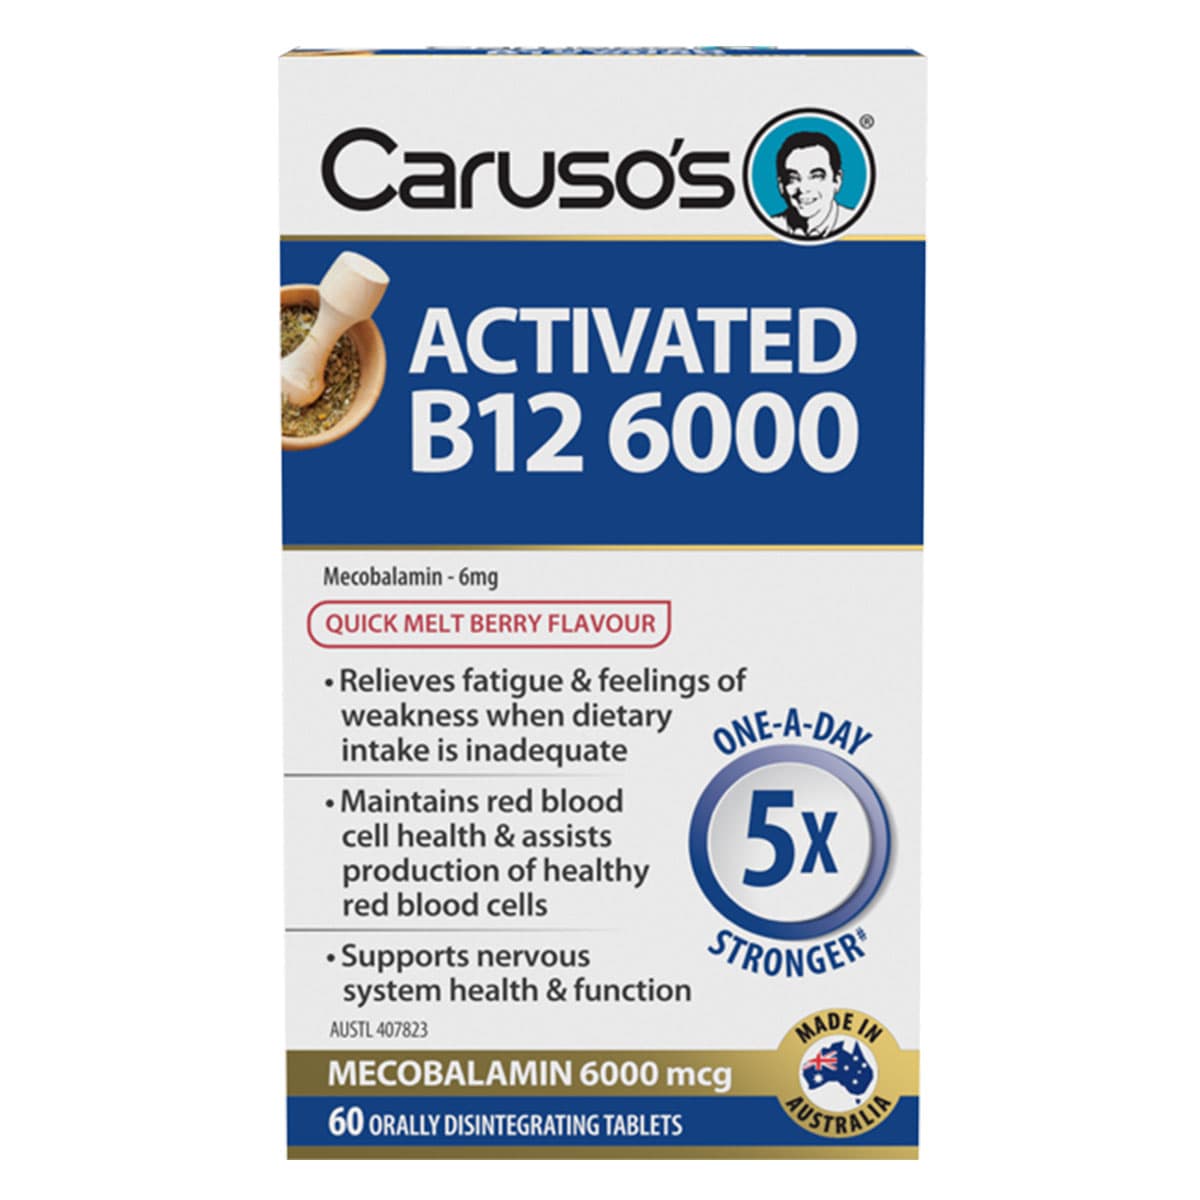 Carusos Activated B12 6000 60 Tablets Australia